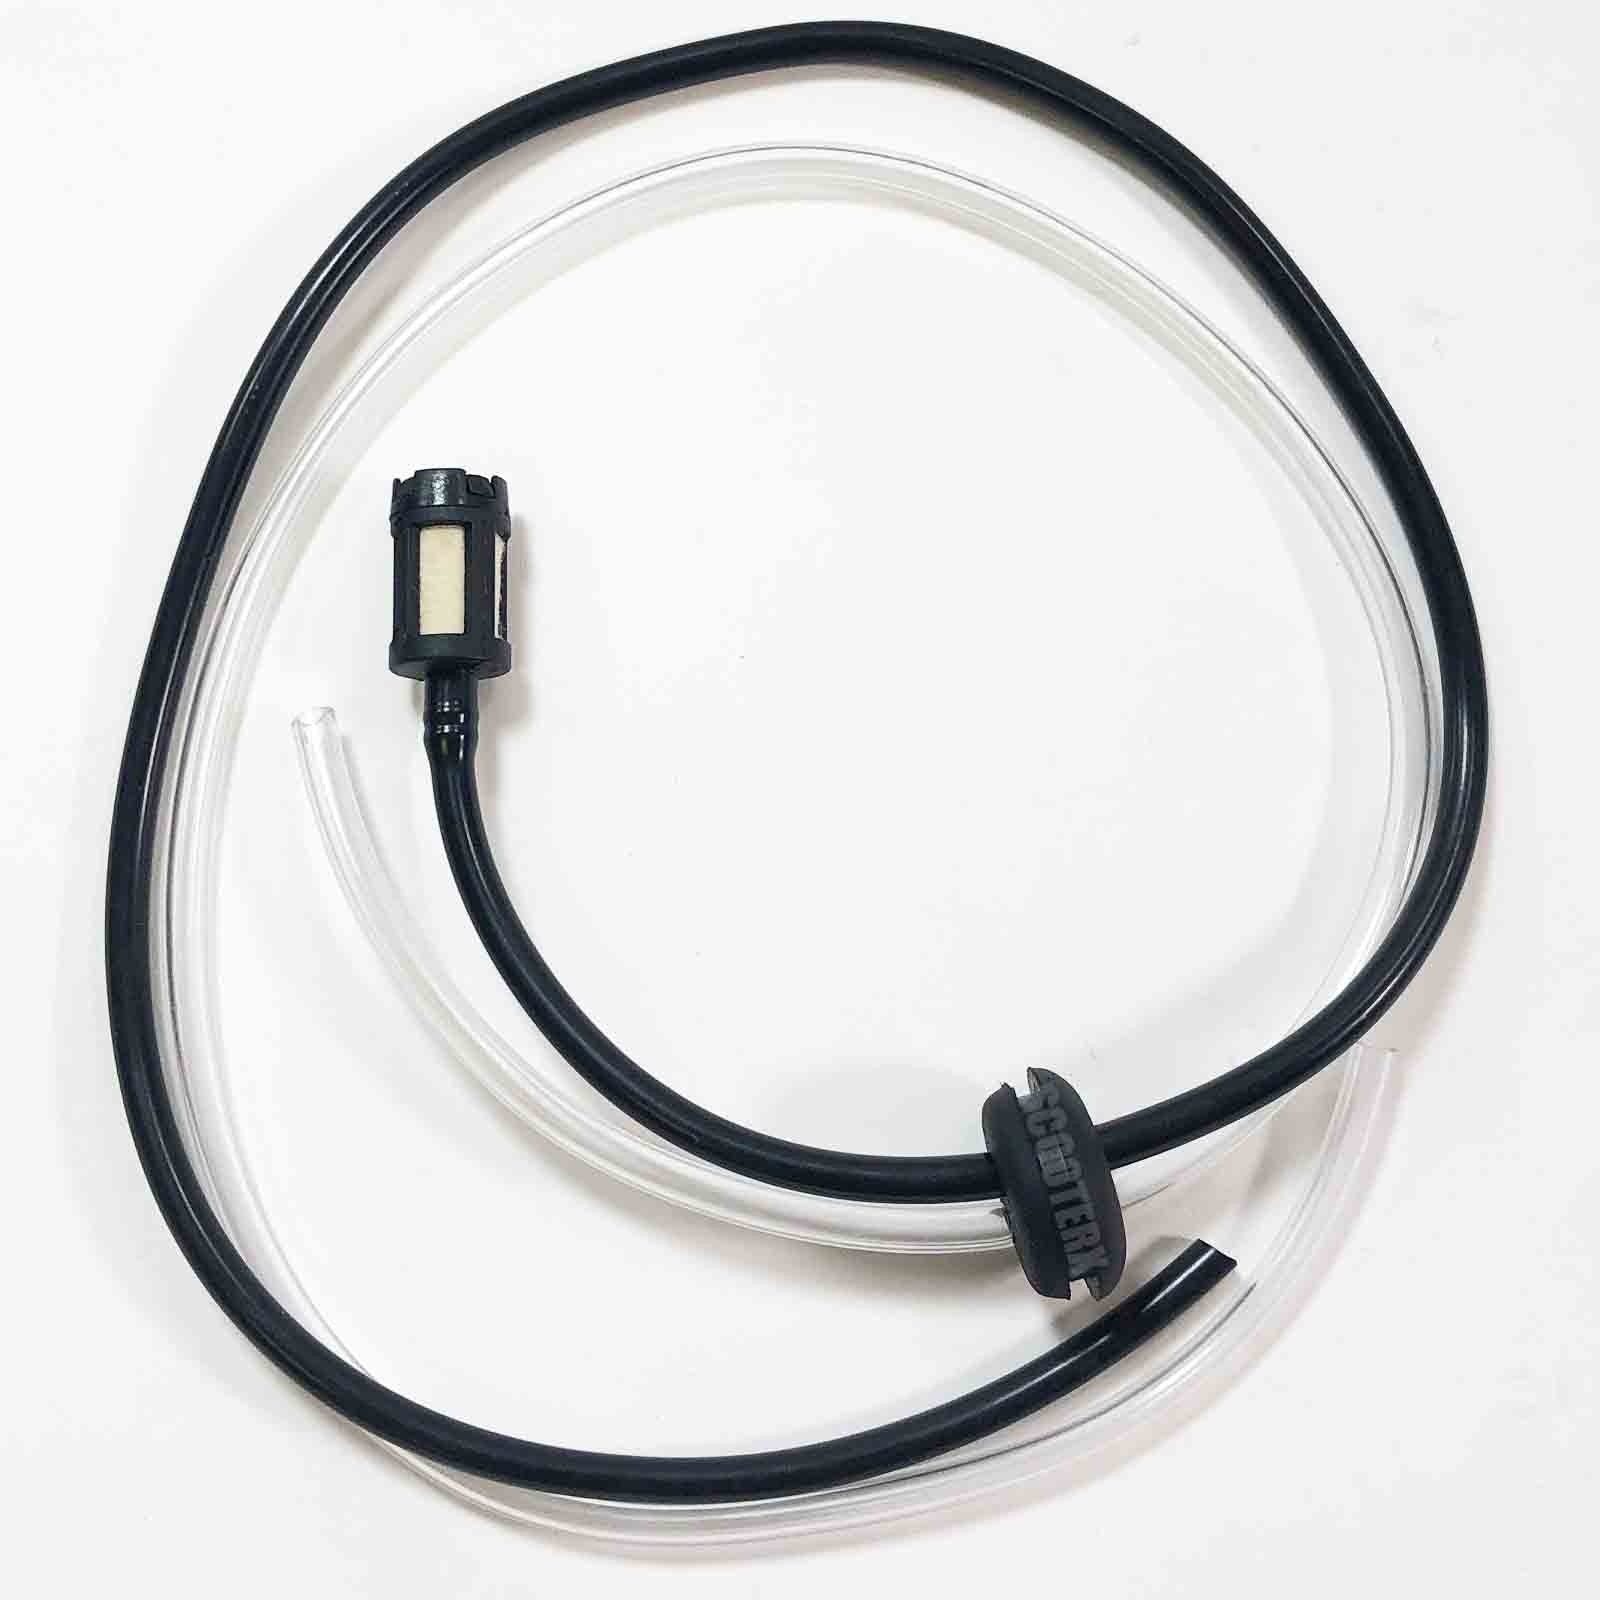 ScooterX FUEL LINES 24" For Dirt Dog Gas Scooter